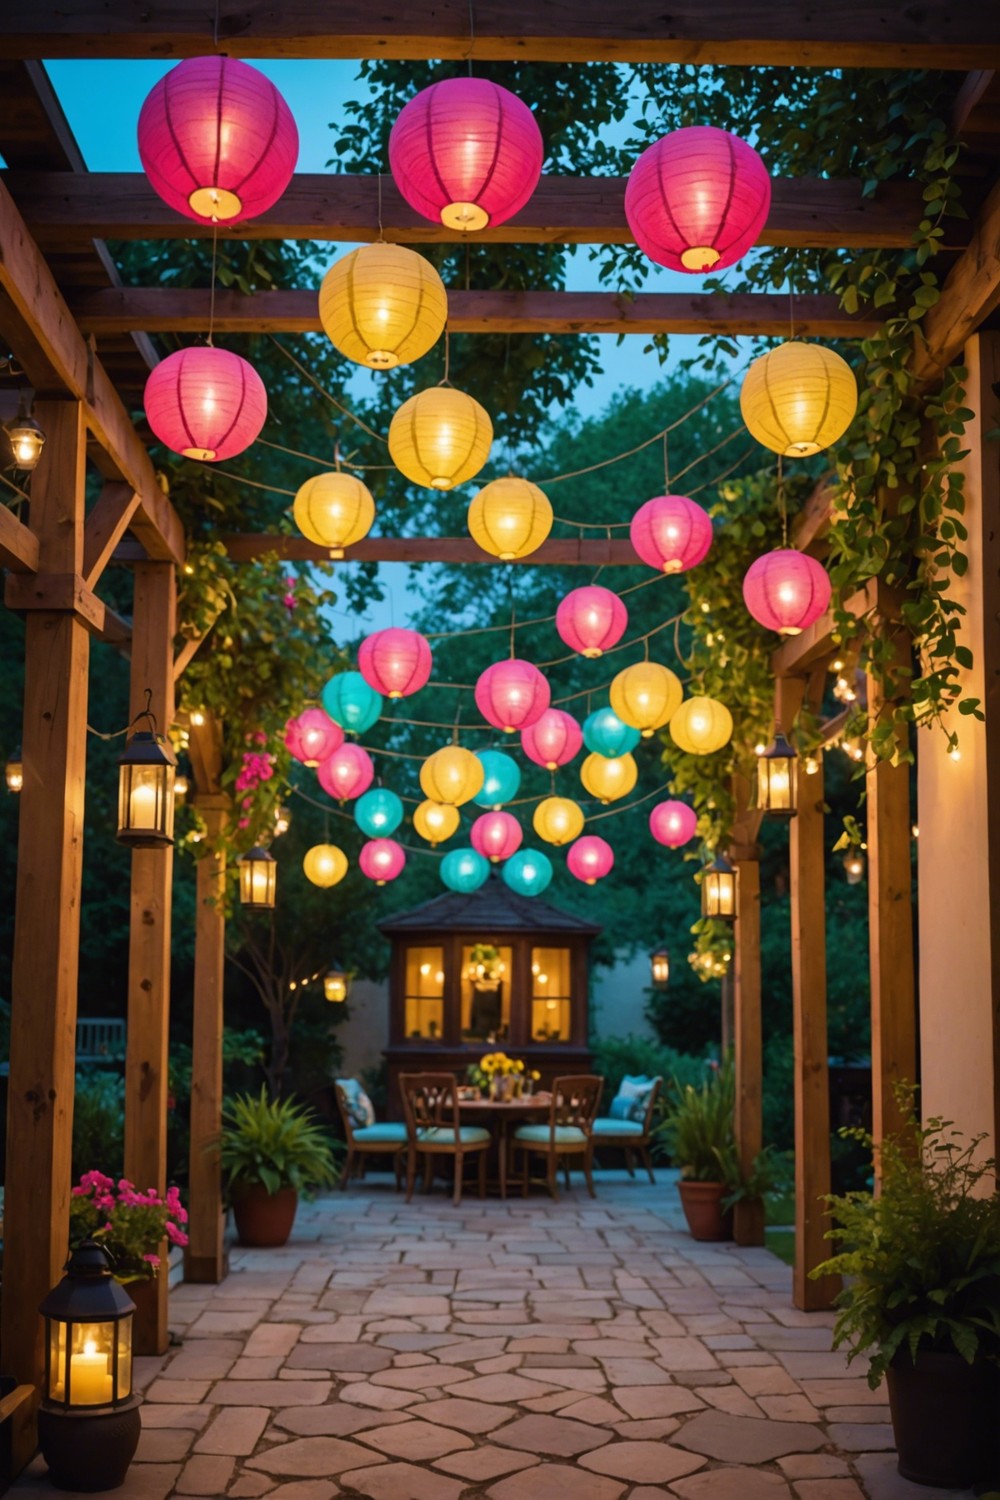 Hanging Fabric Lanterns in Vibrant Colors and Patterns